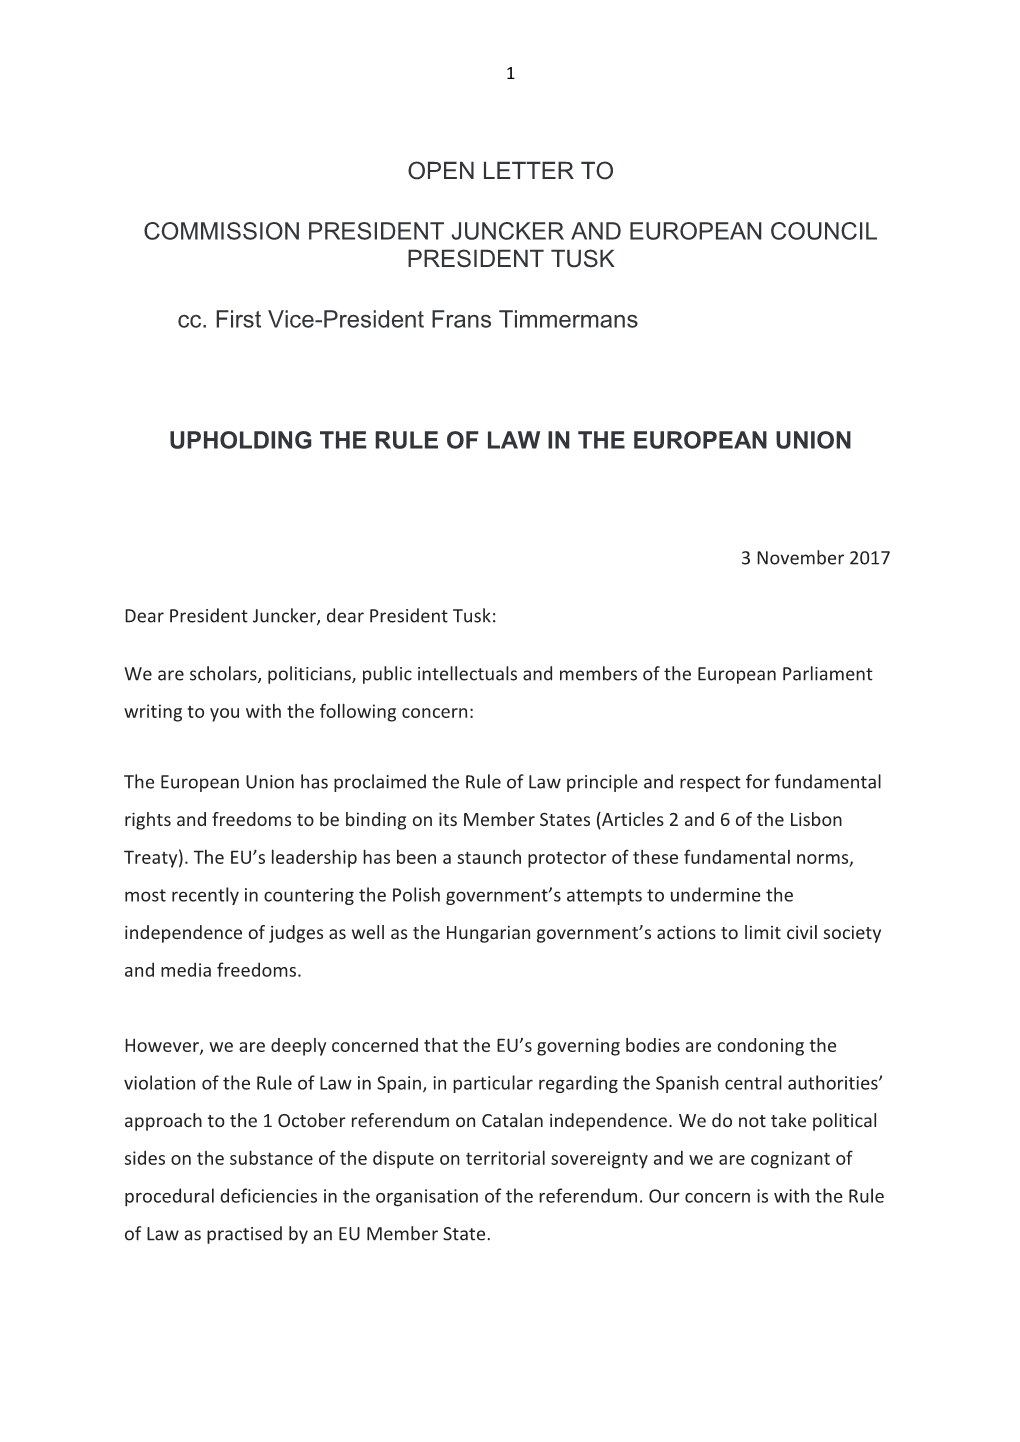 Upholding the Rule of Law in the European Union